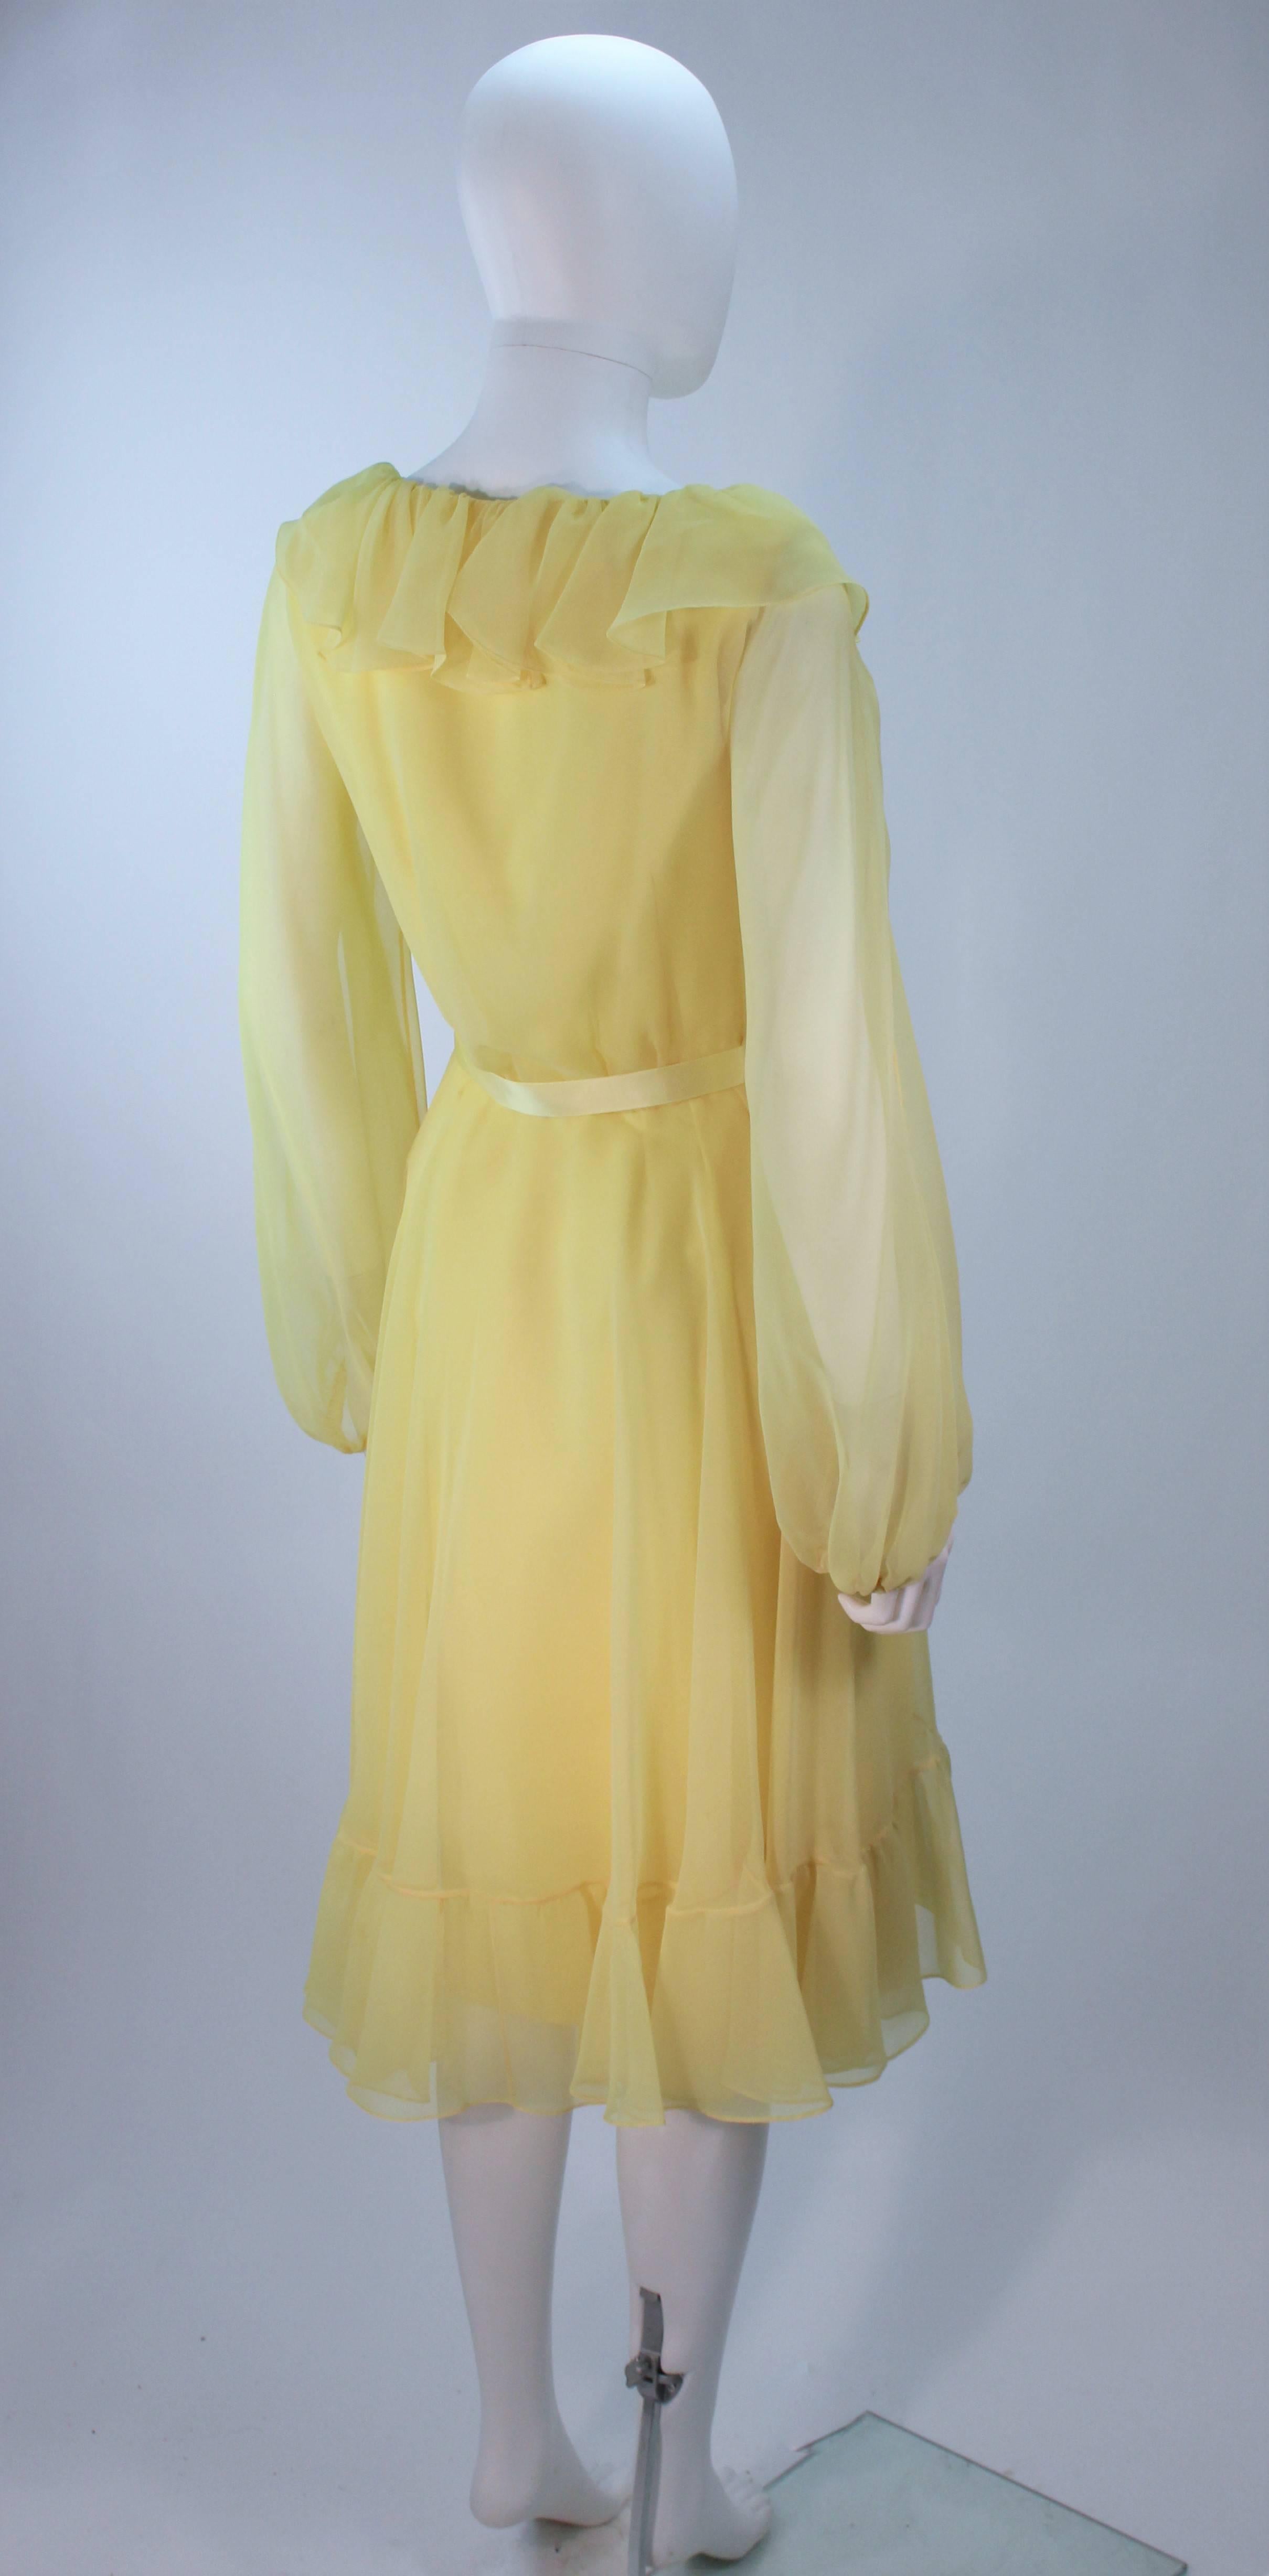 TRAVILLA Yellow Ruffled Chiffon Dress with Billow Sleeves Size 8 In Excellent Condition For Sale In Los Angeles, CA